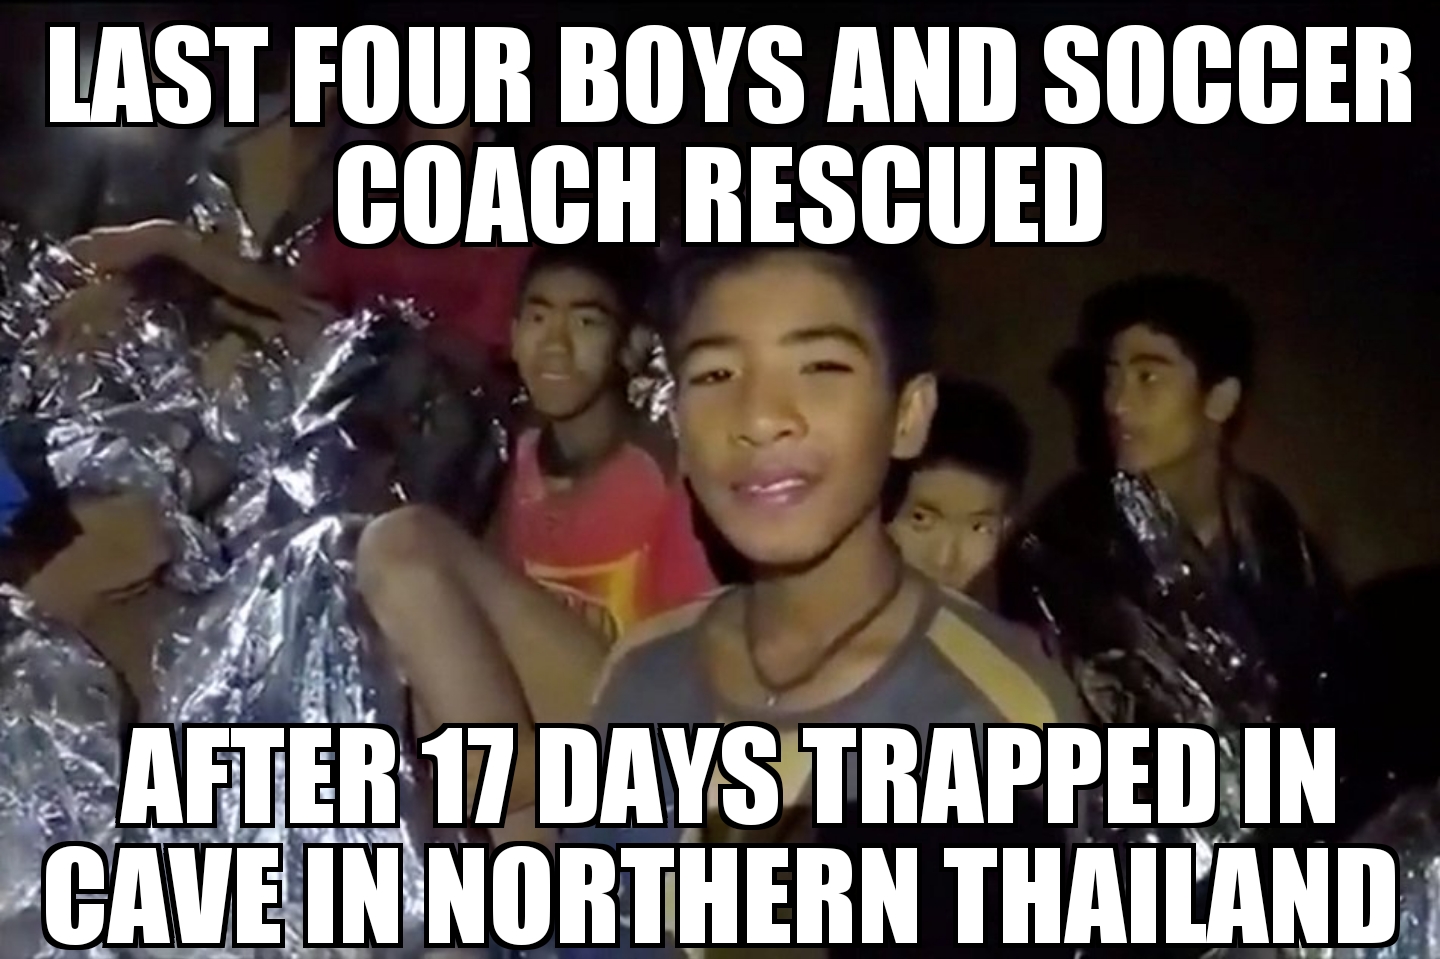 All 13 rescued from Thai cave